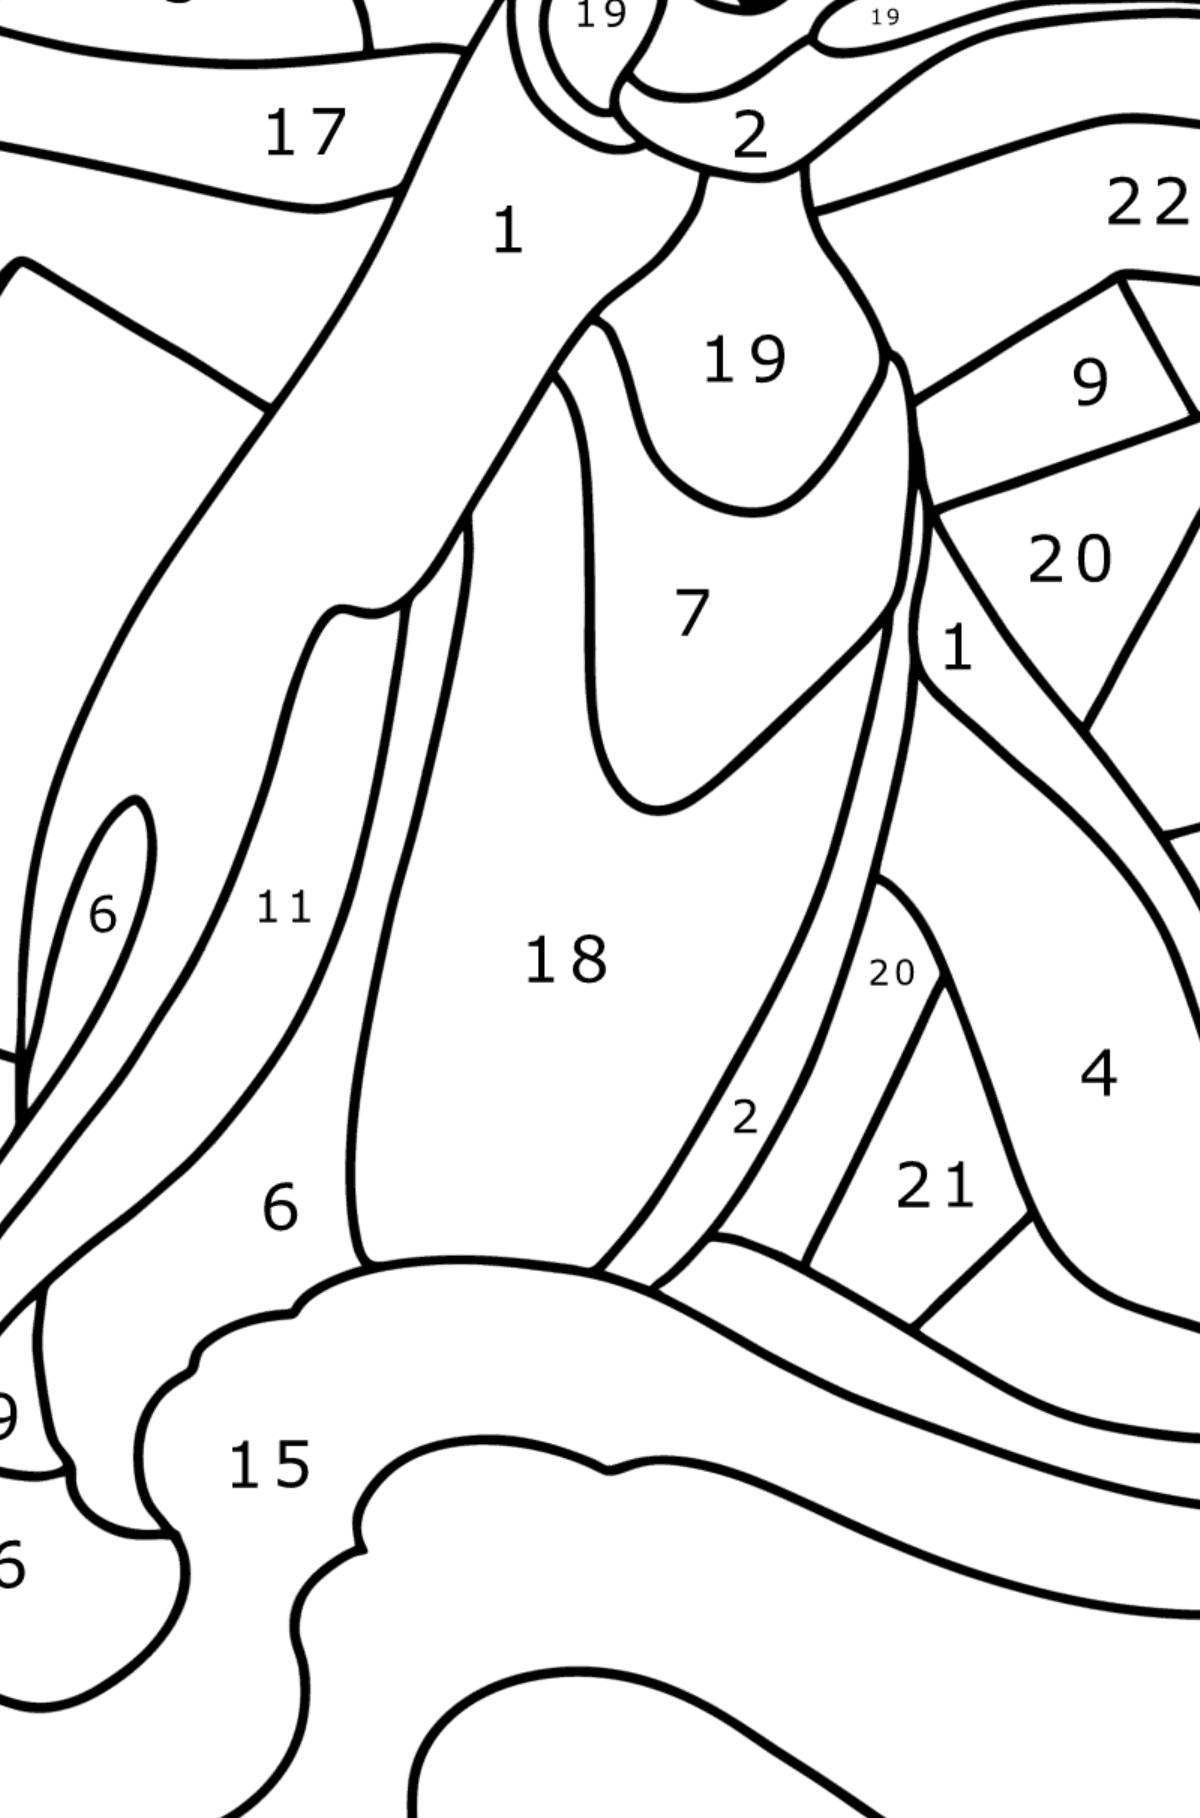 Fascinating penguin by number coloring book